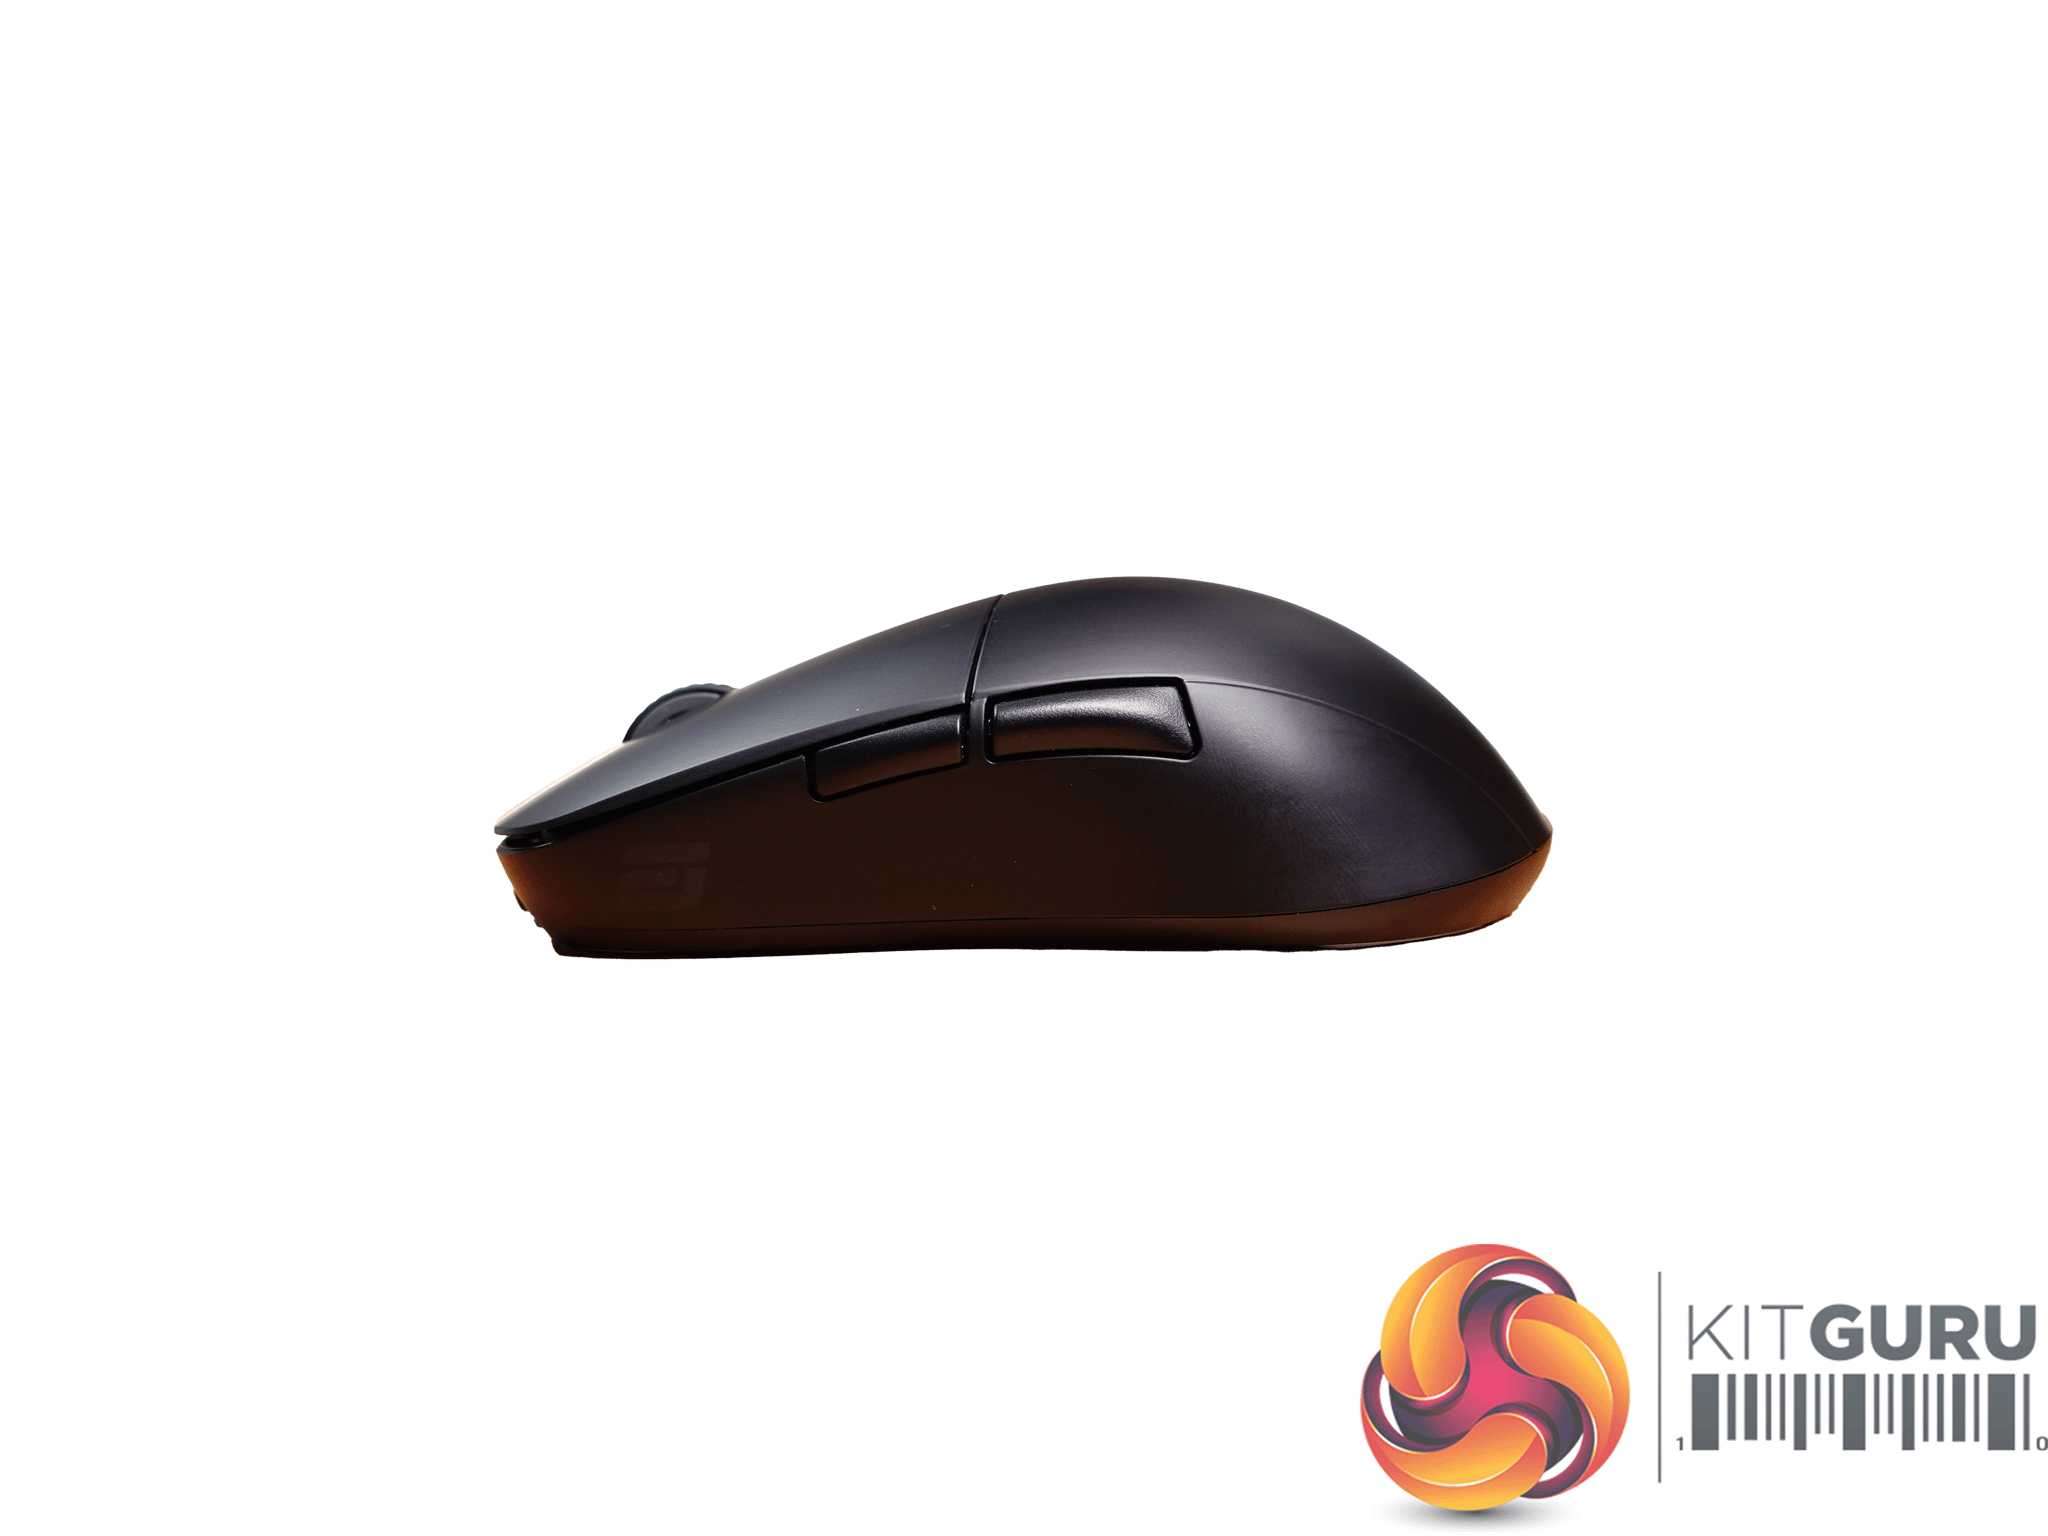 Endgame Gear XM2WE Wireless Gaming Mouse Review